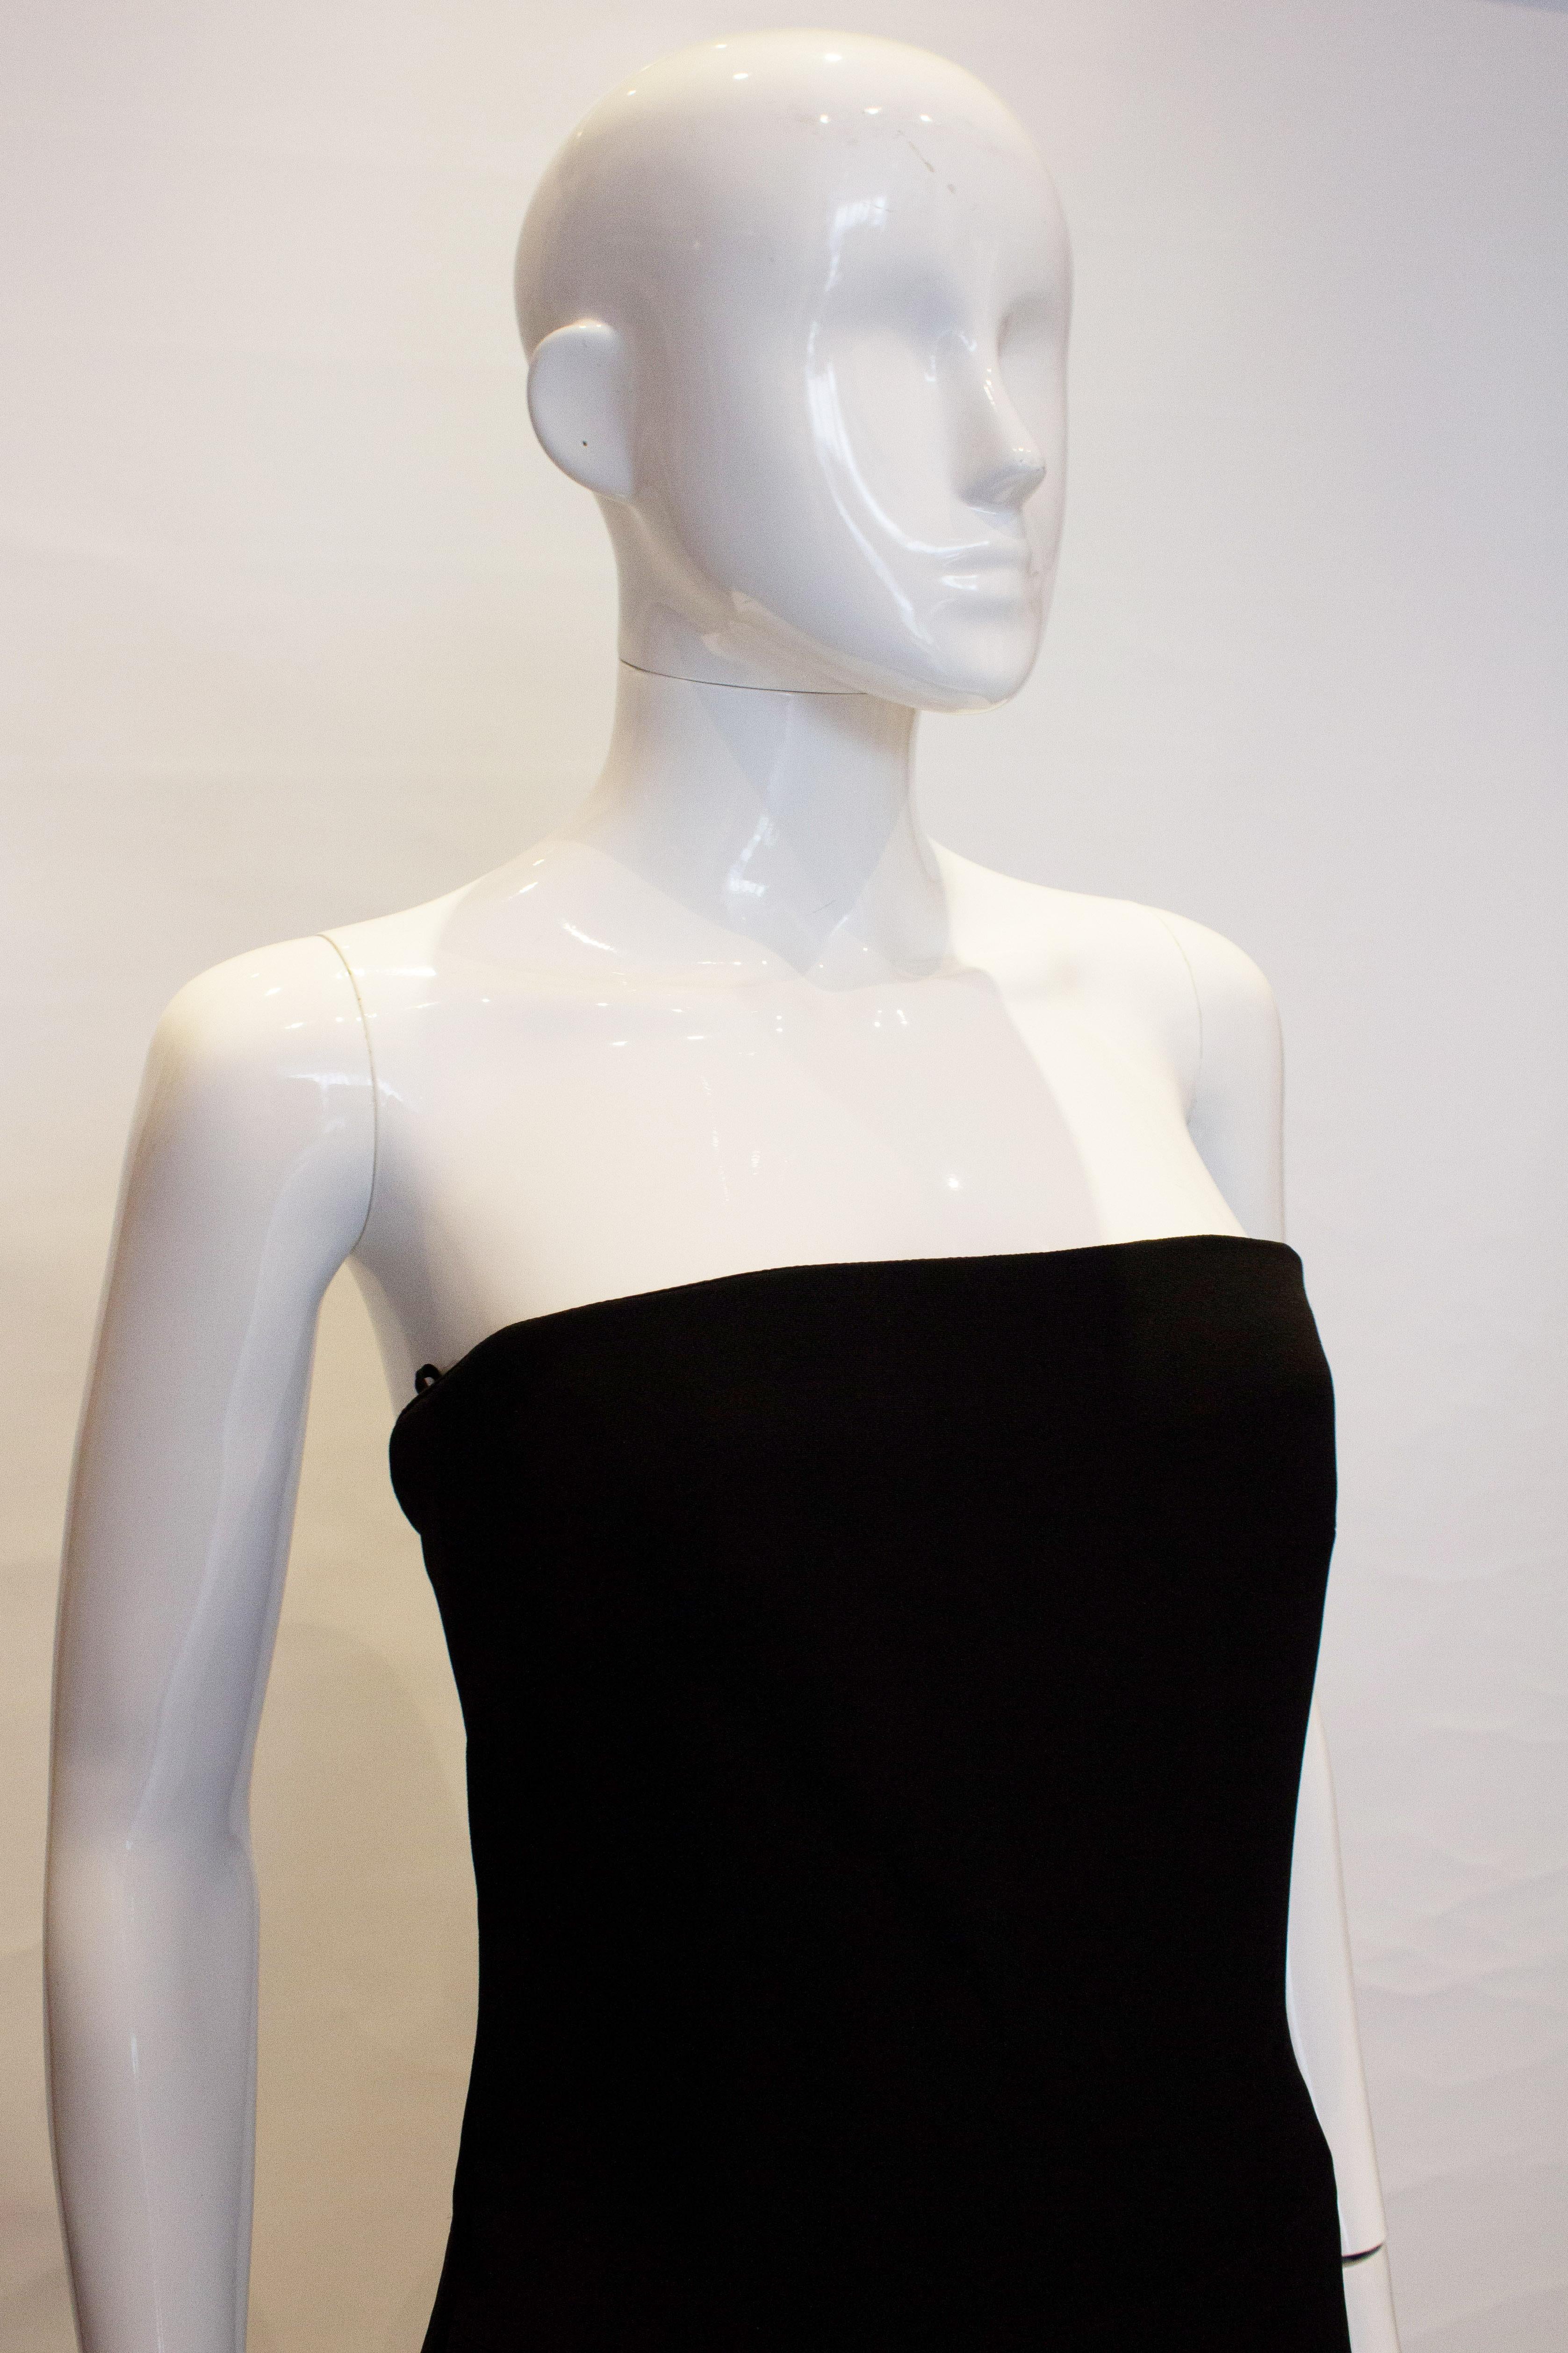 A chic cocktail  dress by Amanda Wakeley.The dress is strapless with beautiful tailoring and boning in the bodice area. It is fully lined with a central back zip.